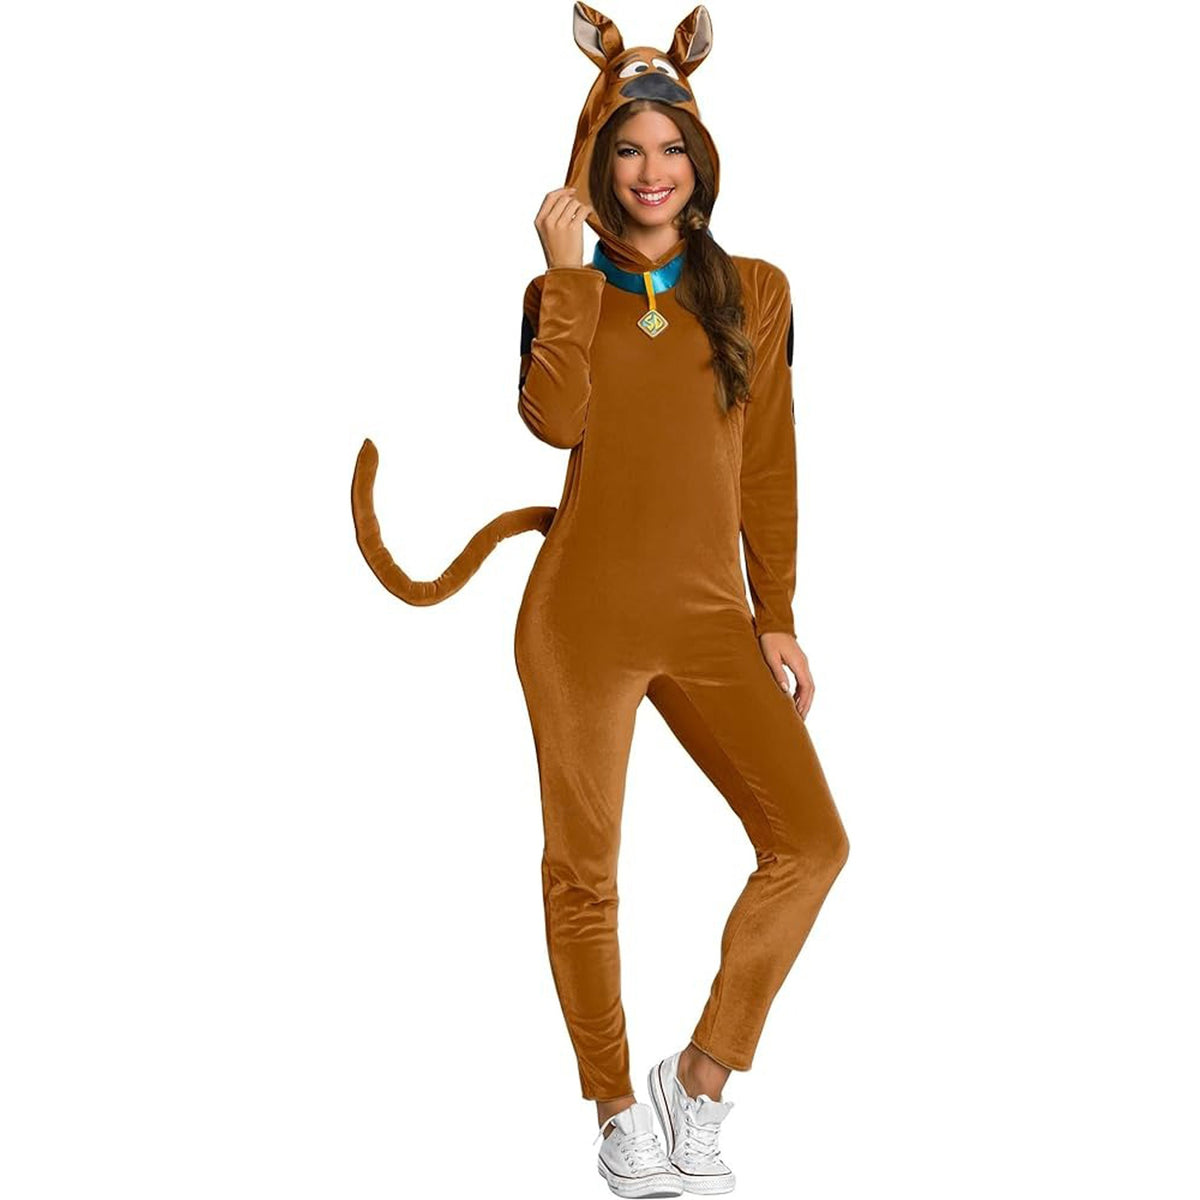 RUBIES II (Ruby Slipper Sales) Costumes Scooby-Doo Costume for Adults, Brown Hooded Jumpsuit